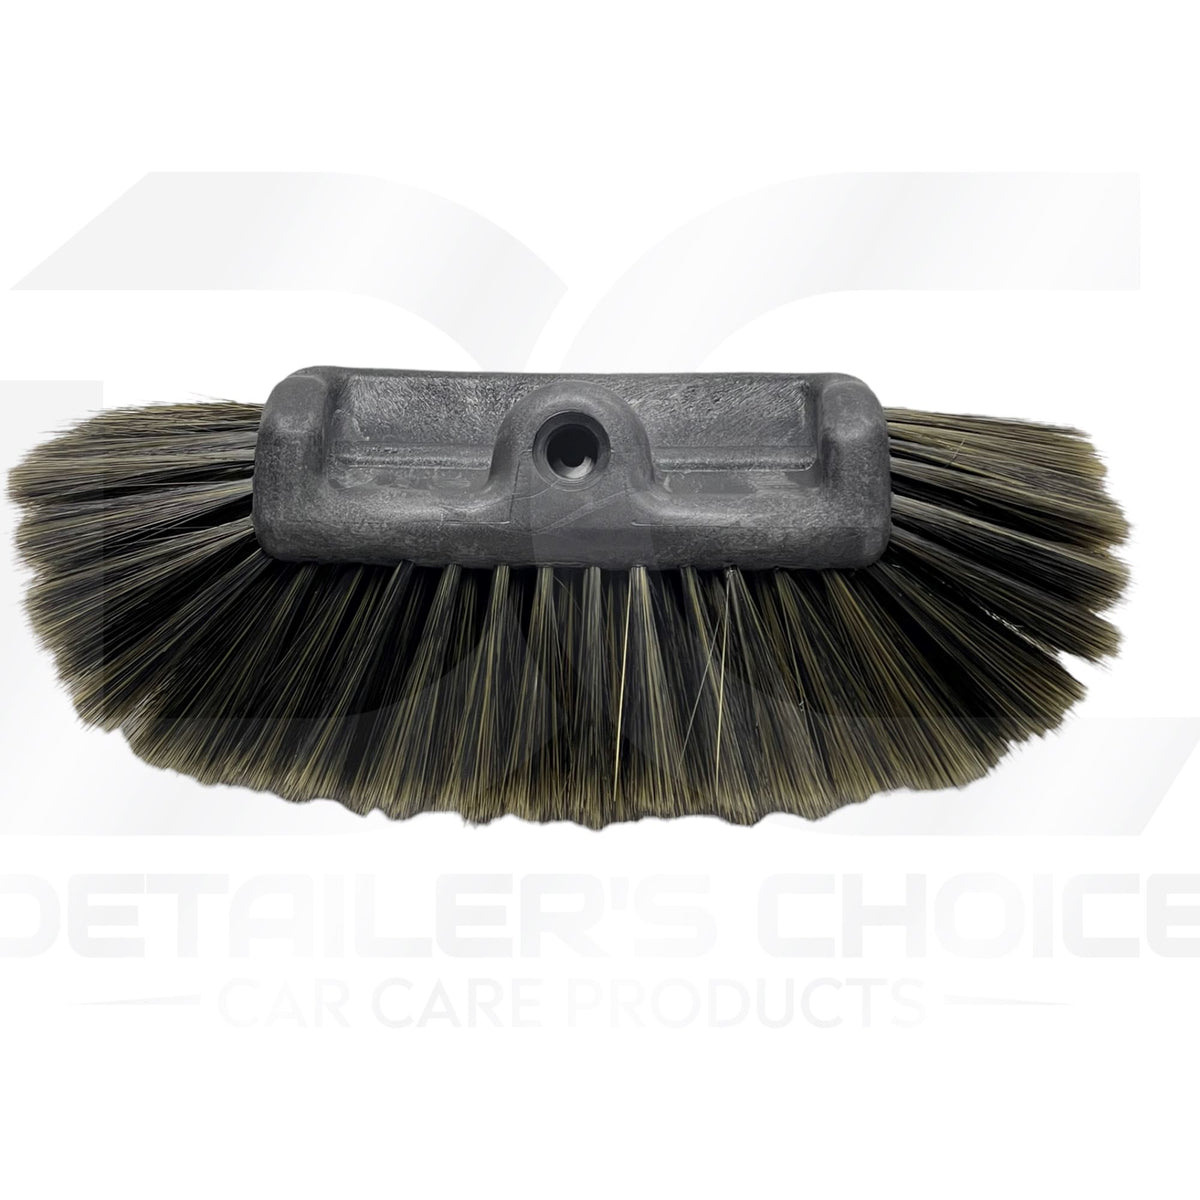 WHEEL BRUSH -green flagged bristles with long handle. Professional  Detailing Products, Because Your Car is a Reflection of You